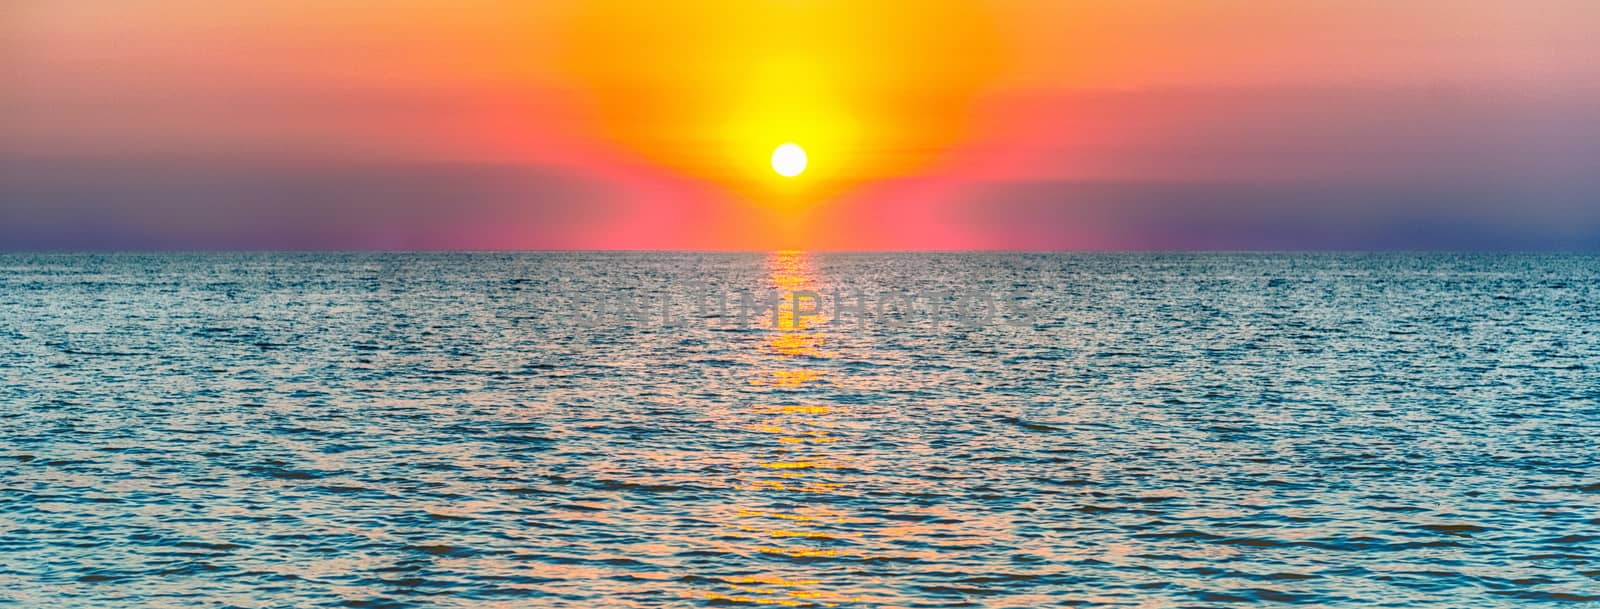 Scenic sunset on the mediterranean sea at the end of summer